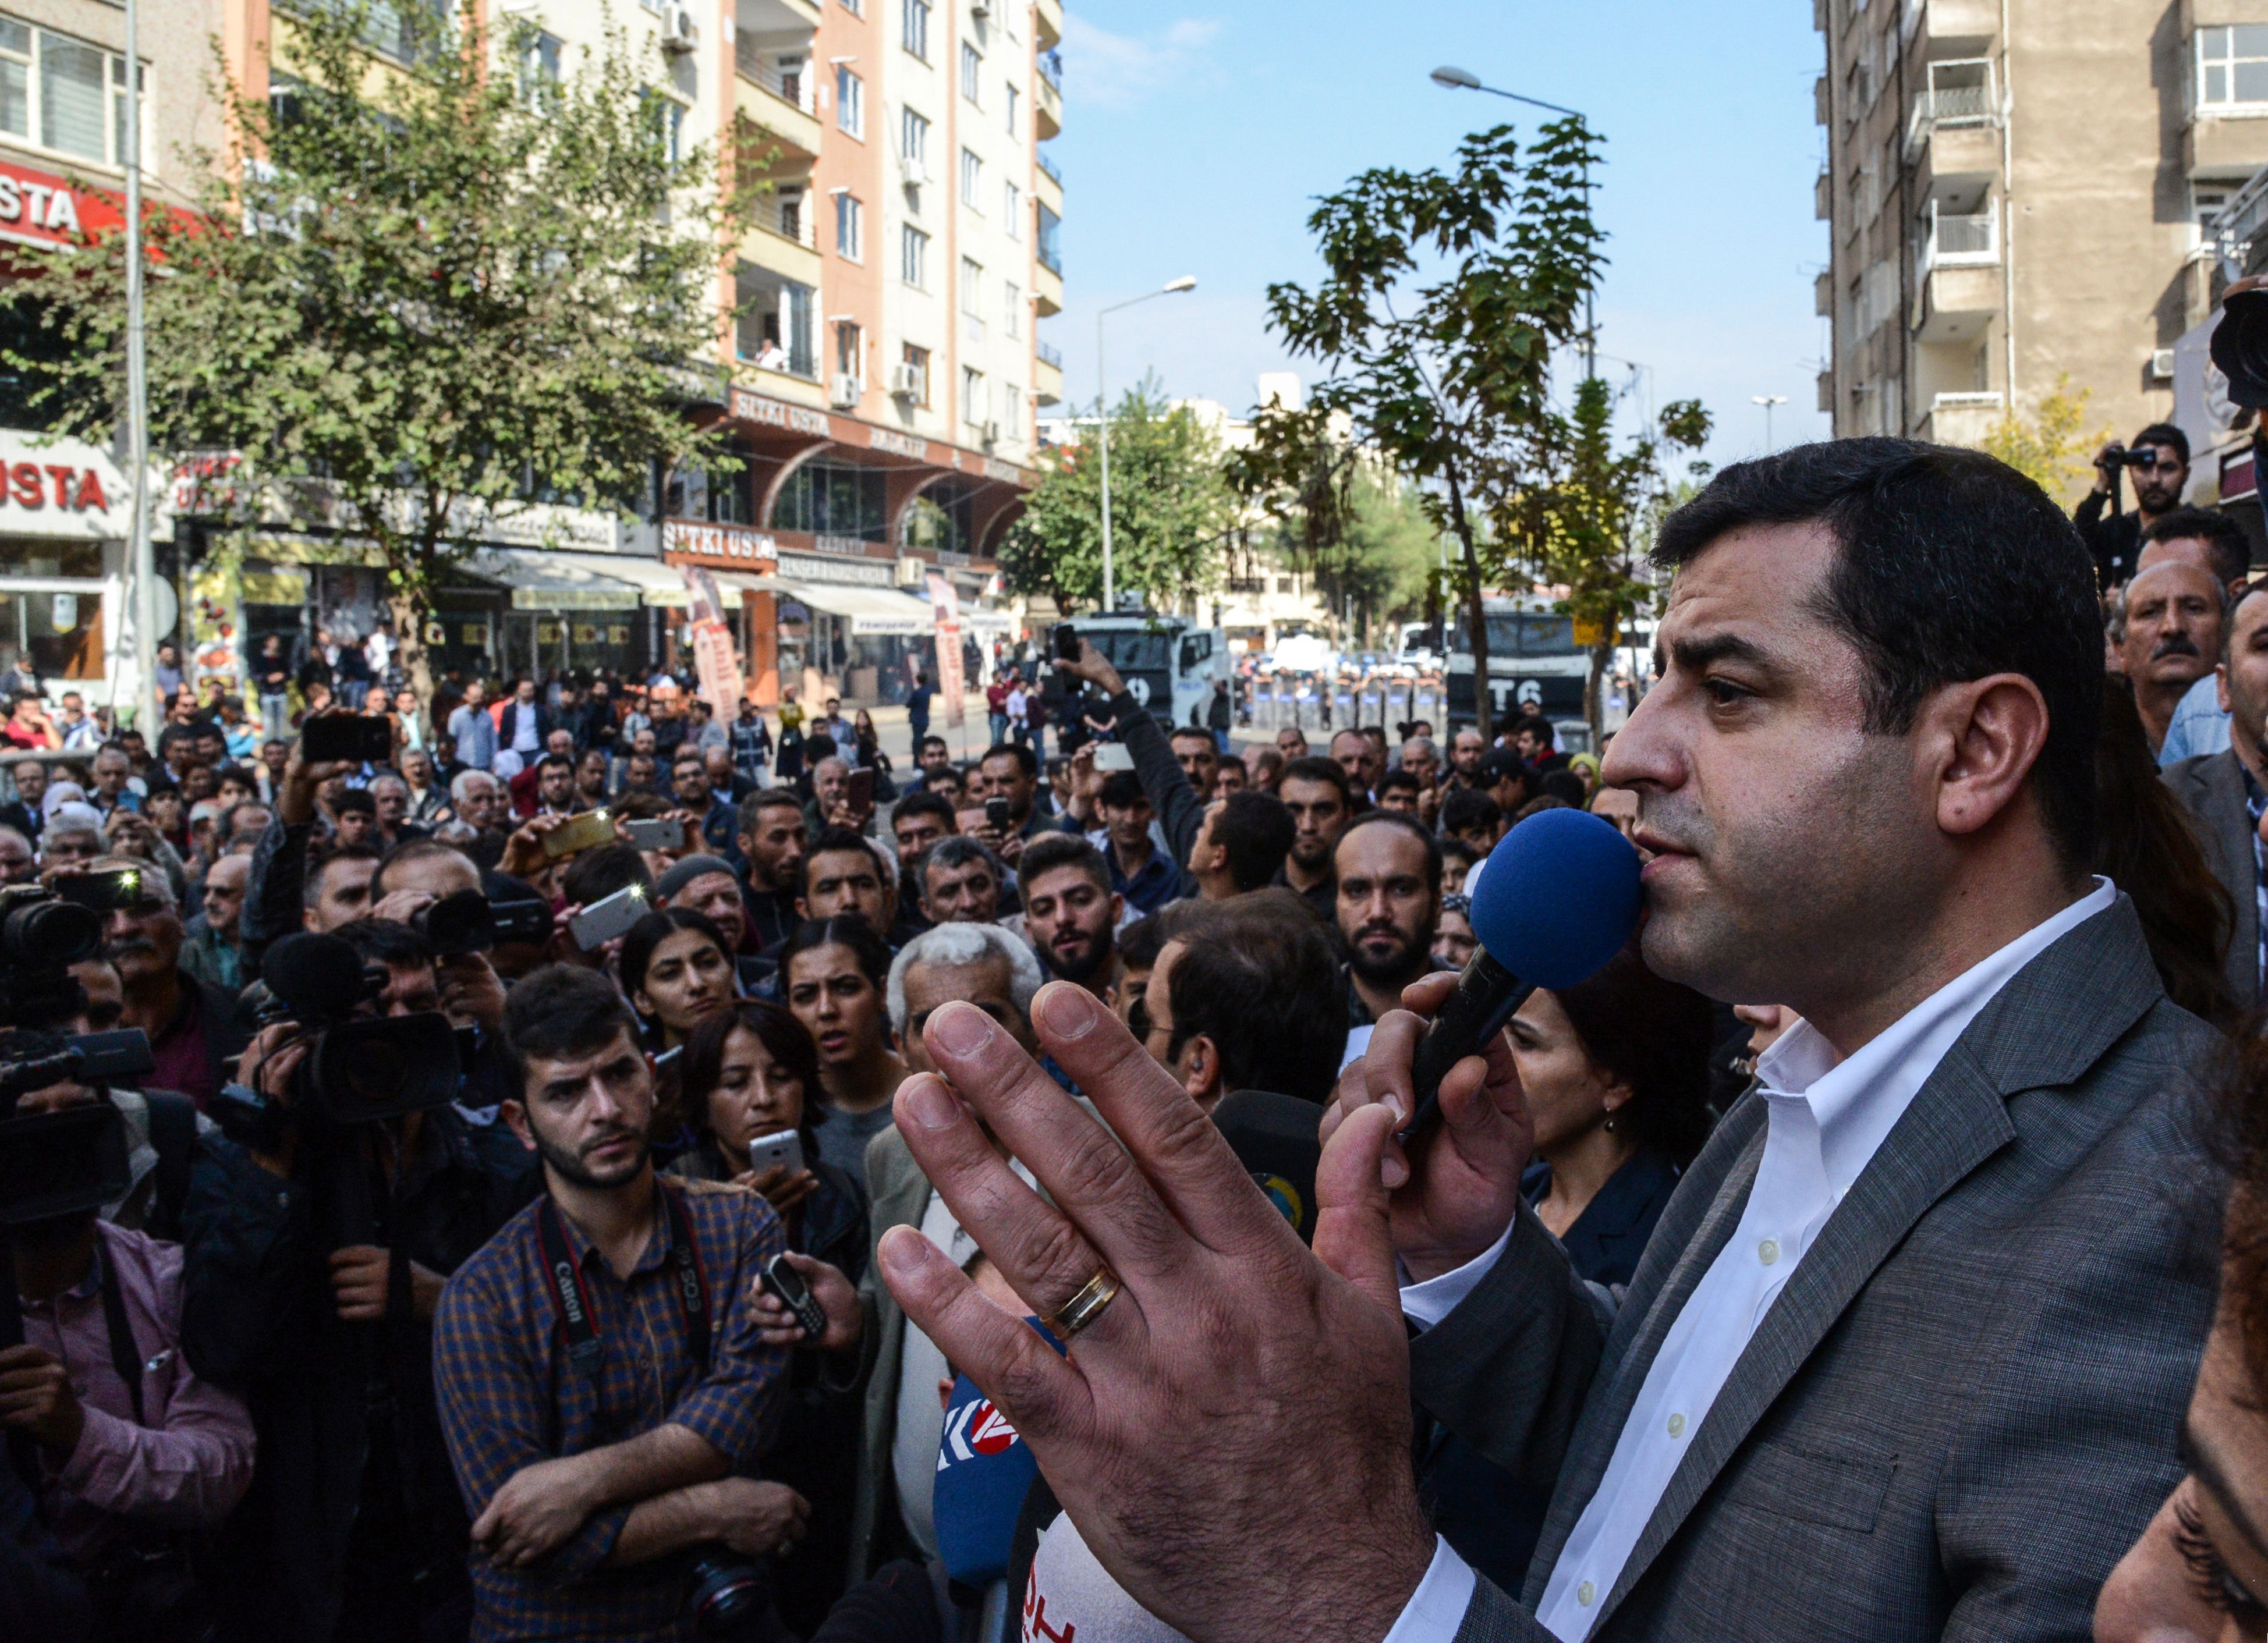 Selahattin Demirtas, Co-leader of the pro-Kurdish Peoples Democracy Party (HDP), addresses participants of a pro-Kurdish demonstration in front of the municipality headquarters in Diyarbakir, southeastern Turkey, Oct. 30, 2016. (Ilyas Akengin—AFP/Getty Images)